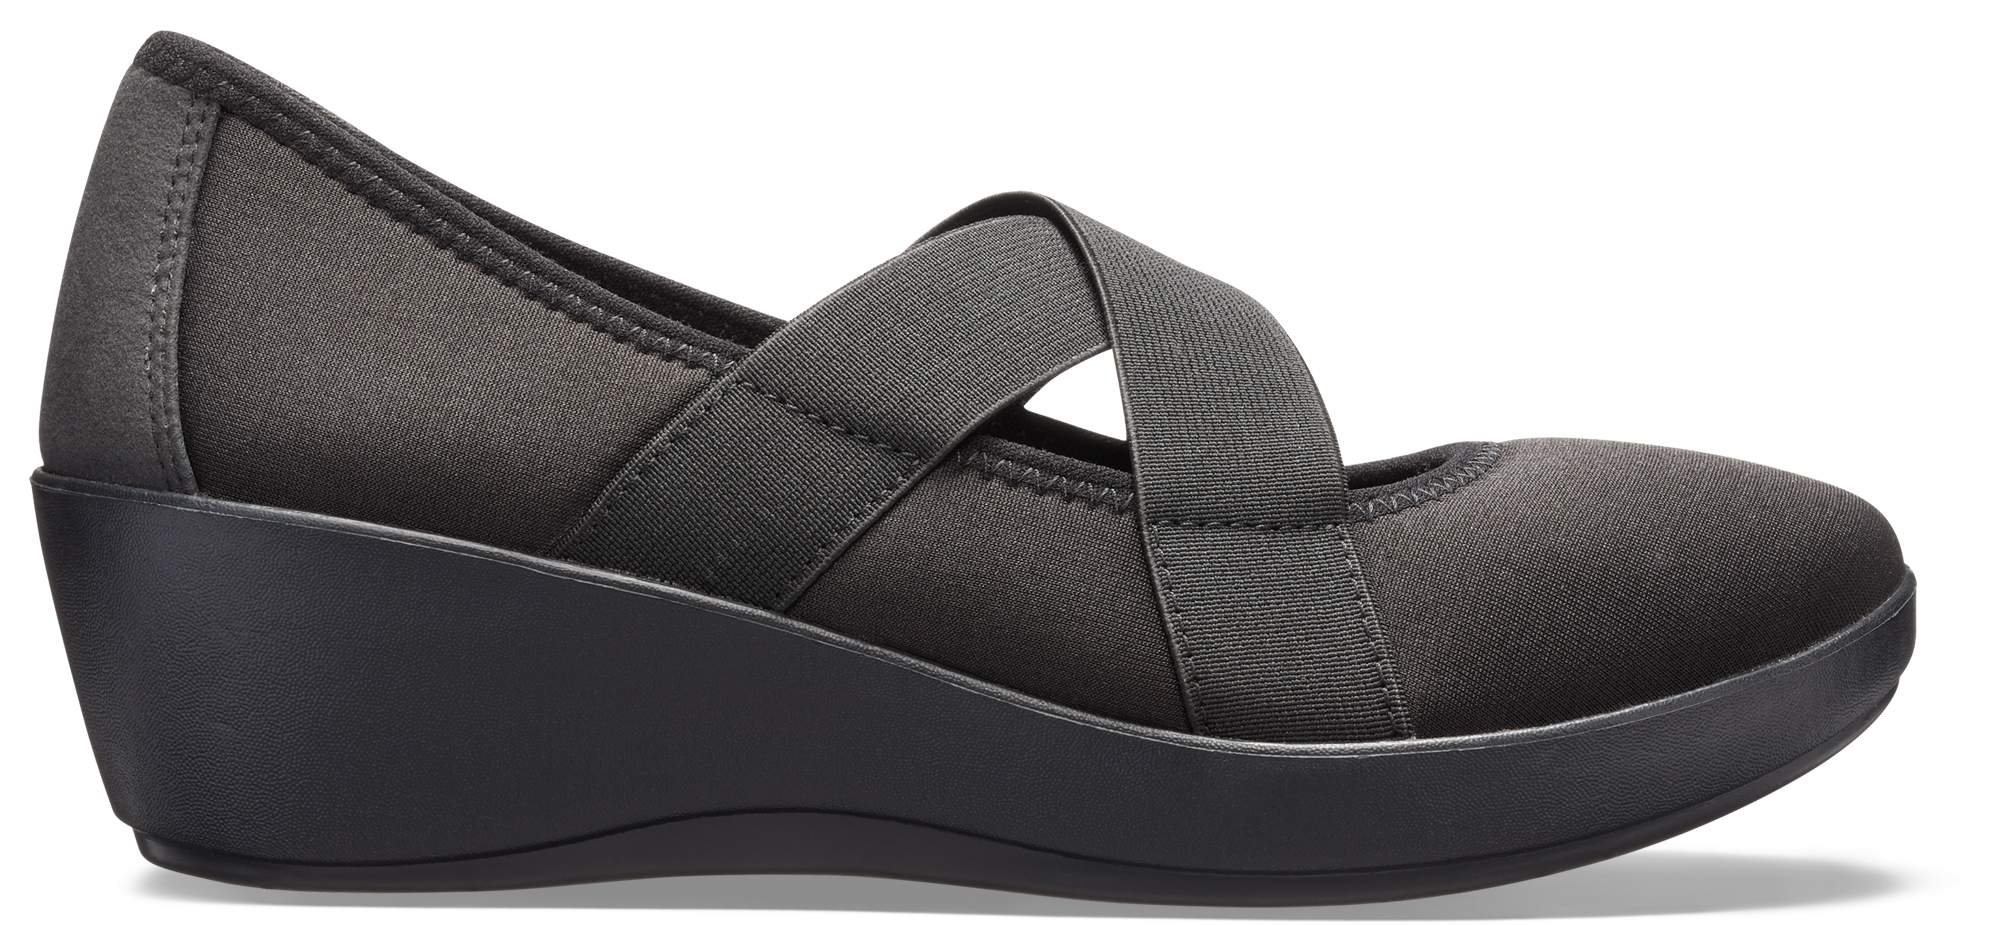 crocs busy day strappy flat